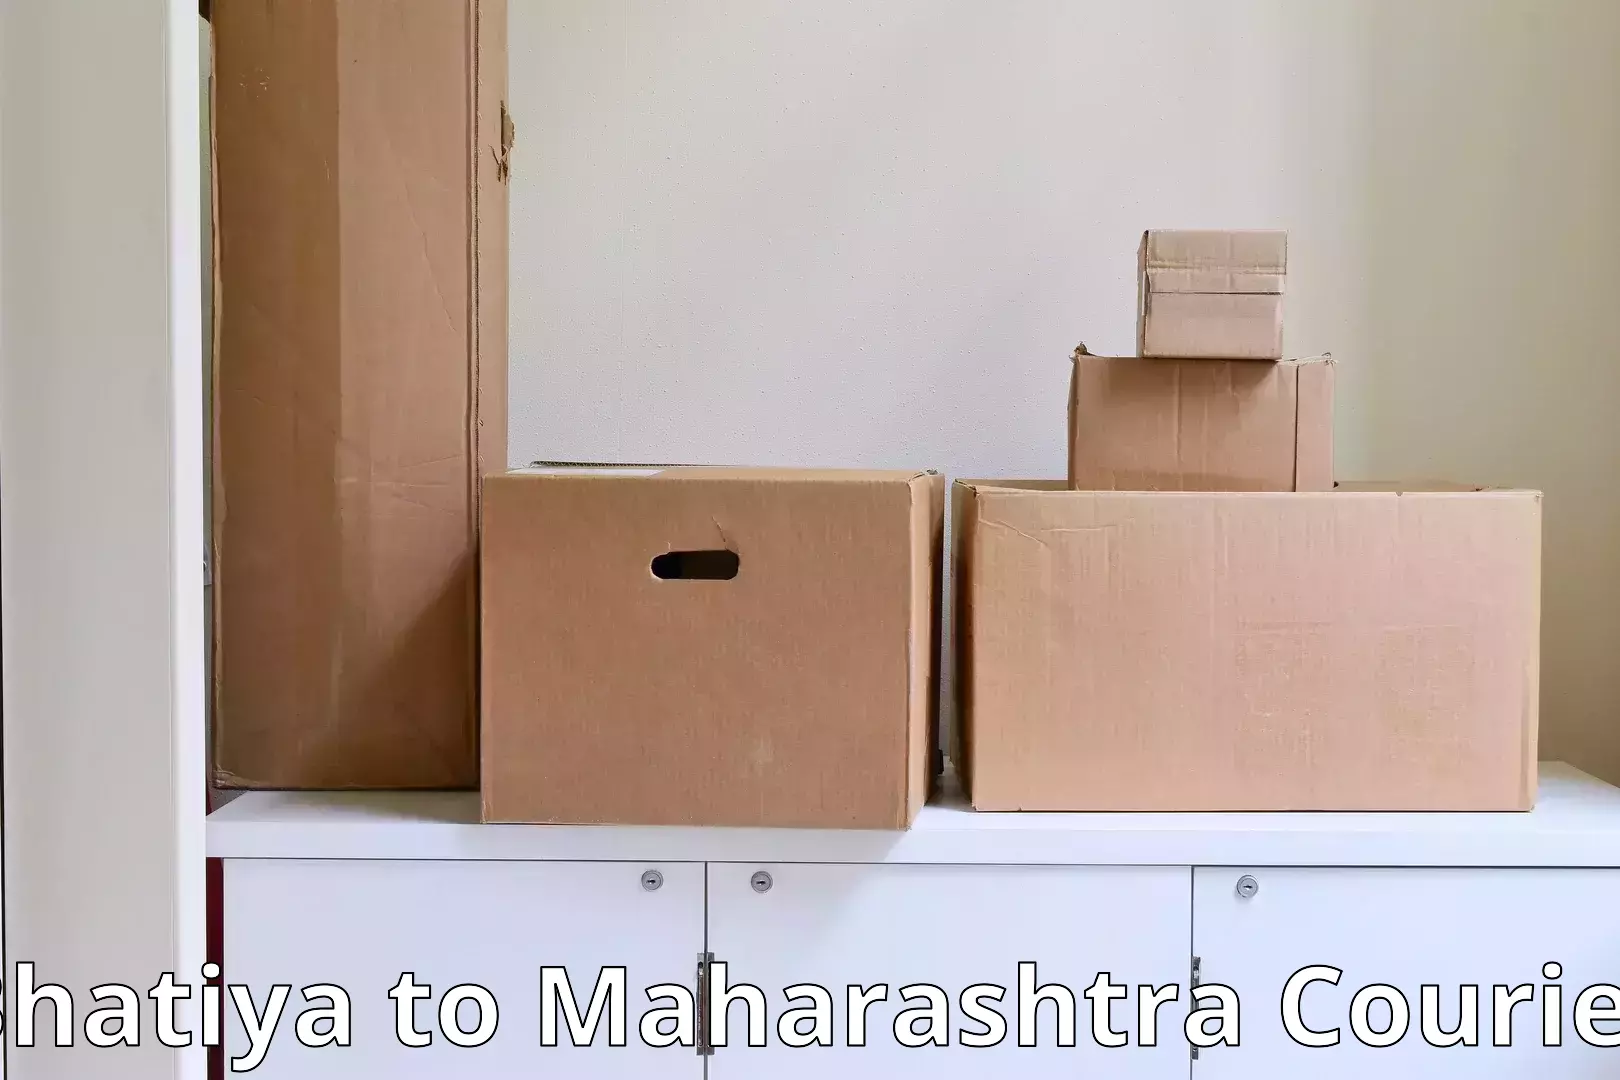 Moving and packing experts Bhatiya to Pune